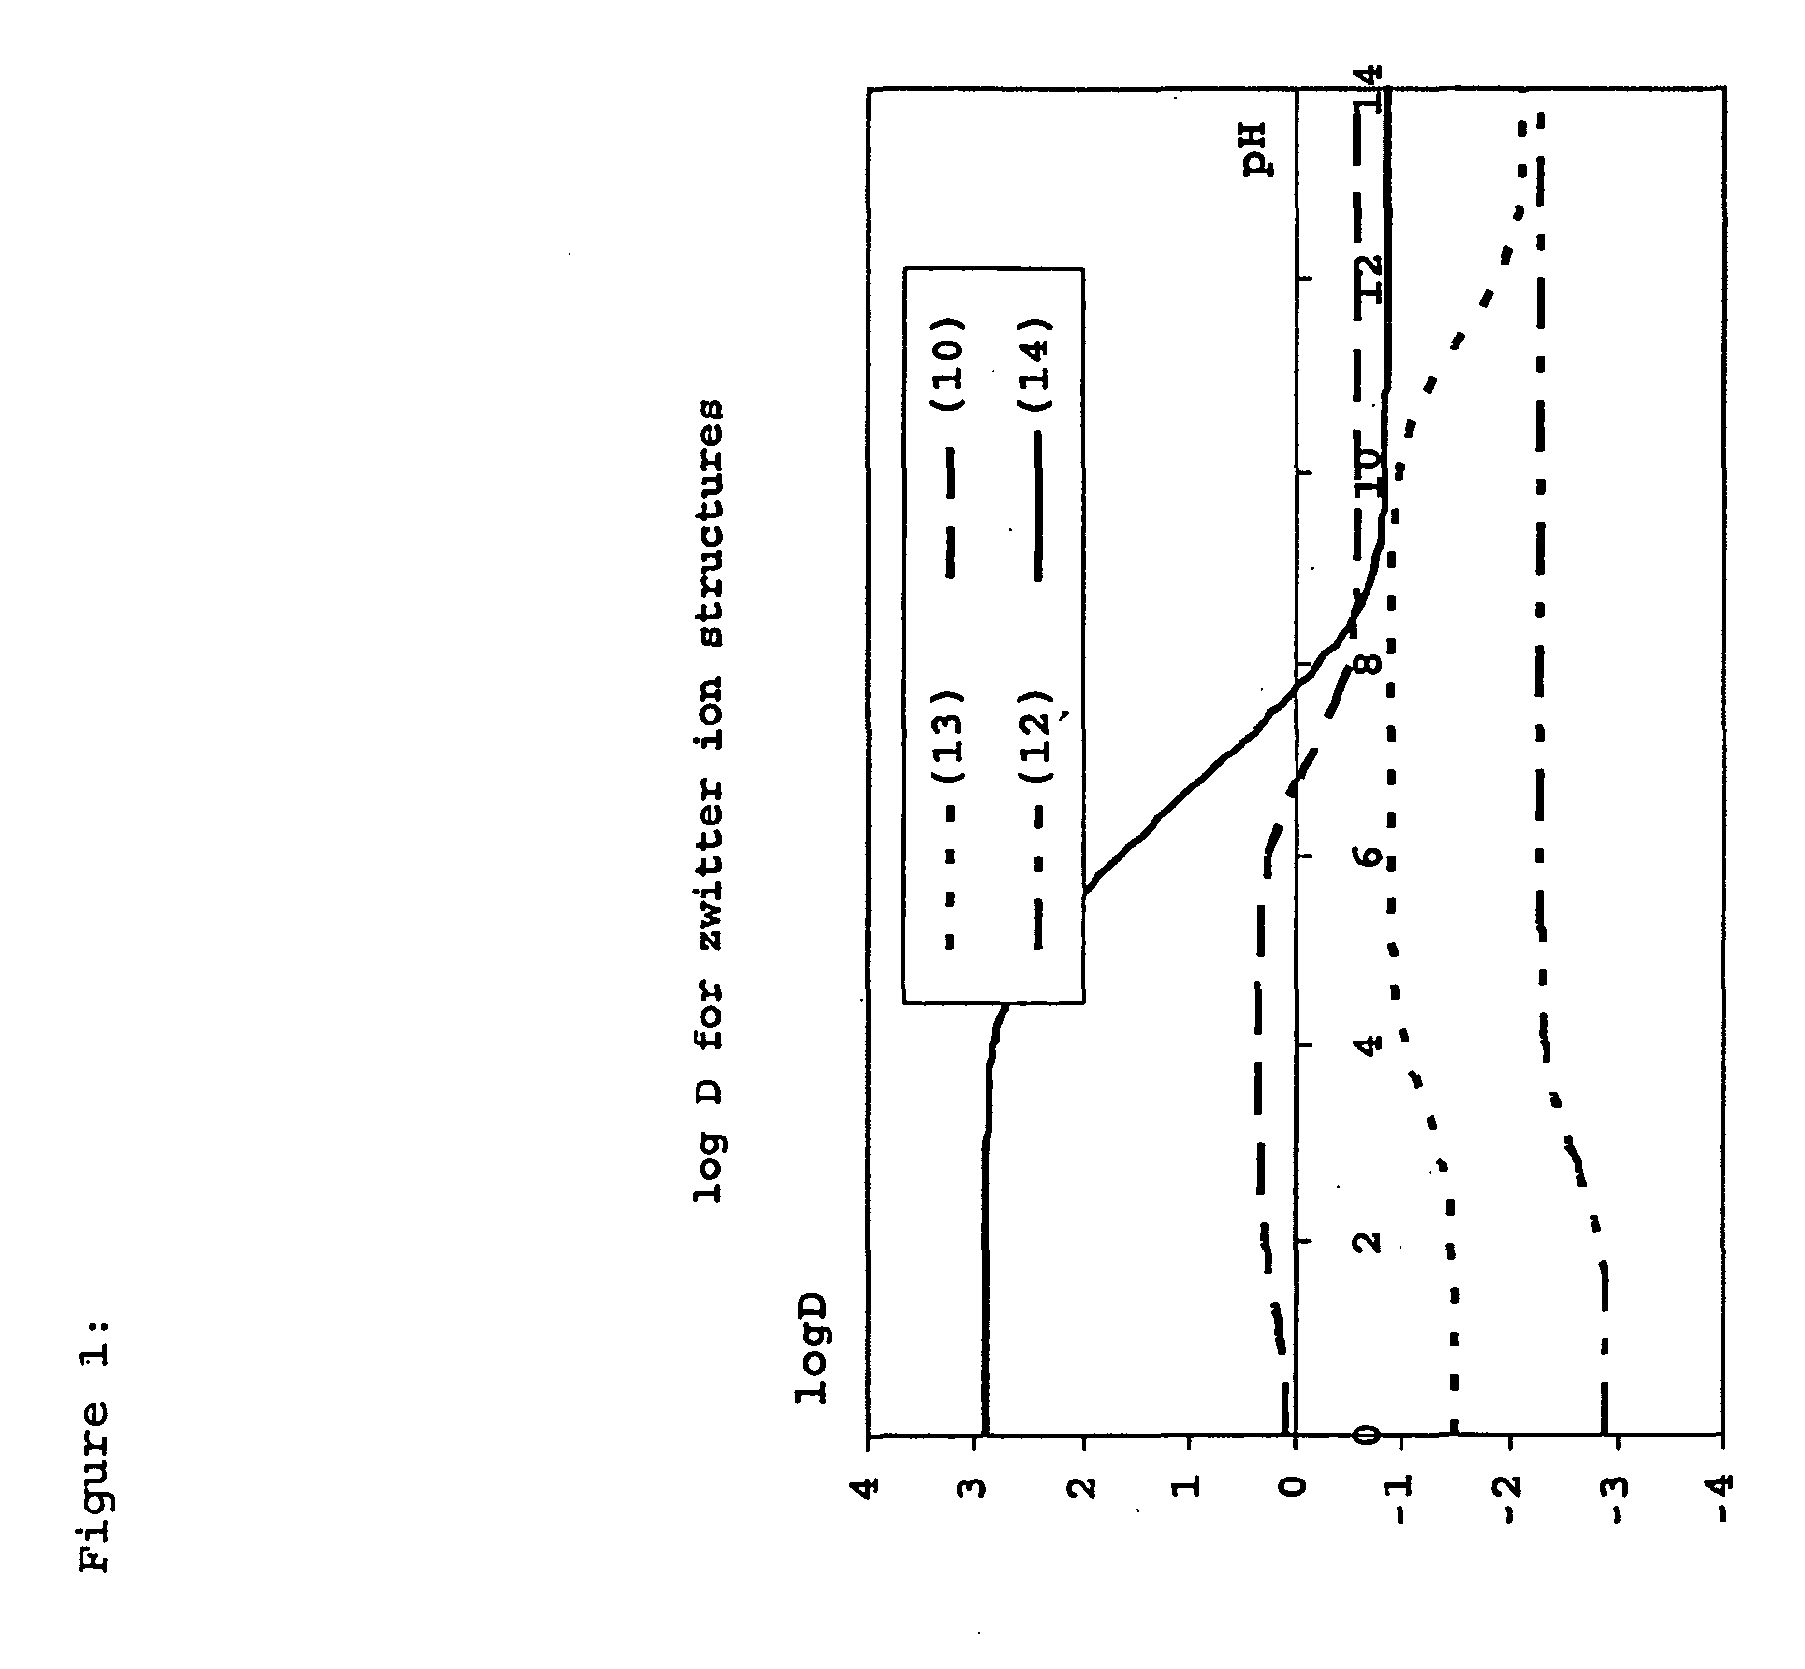 Construction and use of transfection enhancer elements